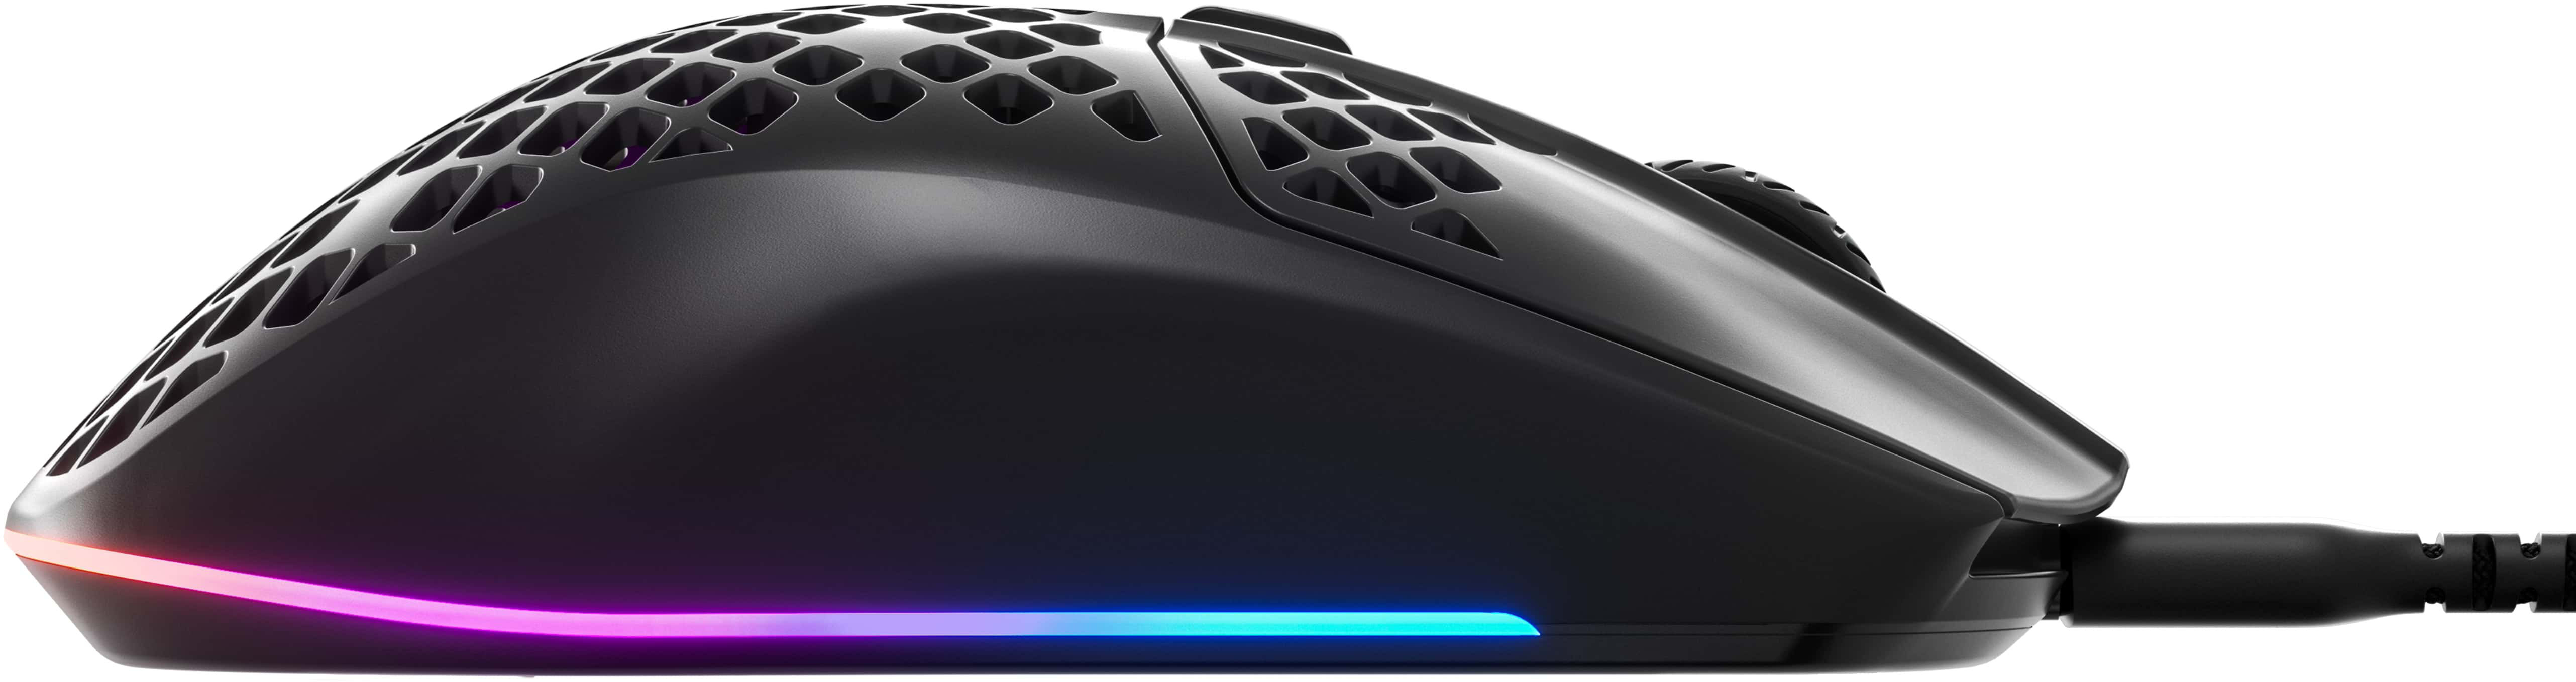 3 Optical - Aerox Light 62611 RGB Honeycomb Gaming Buy SteelSeries Wired Onyx Best Mouse Super